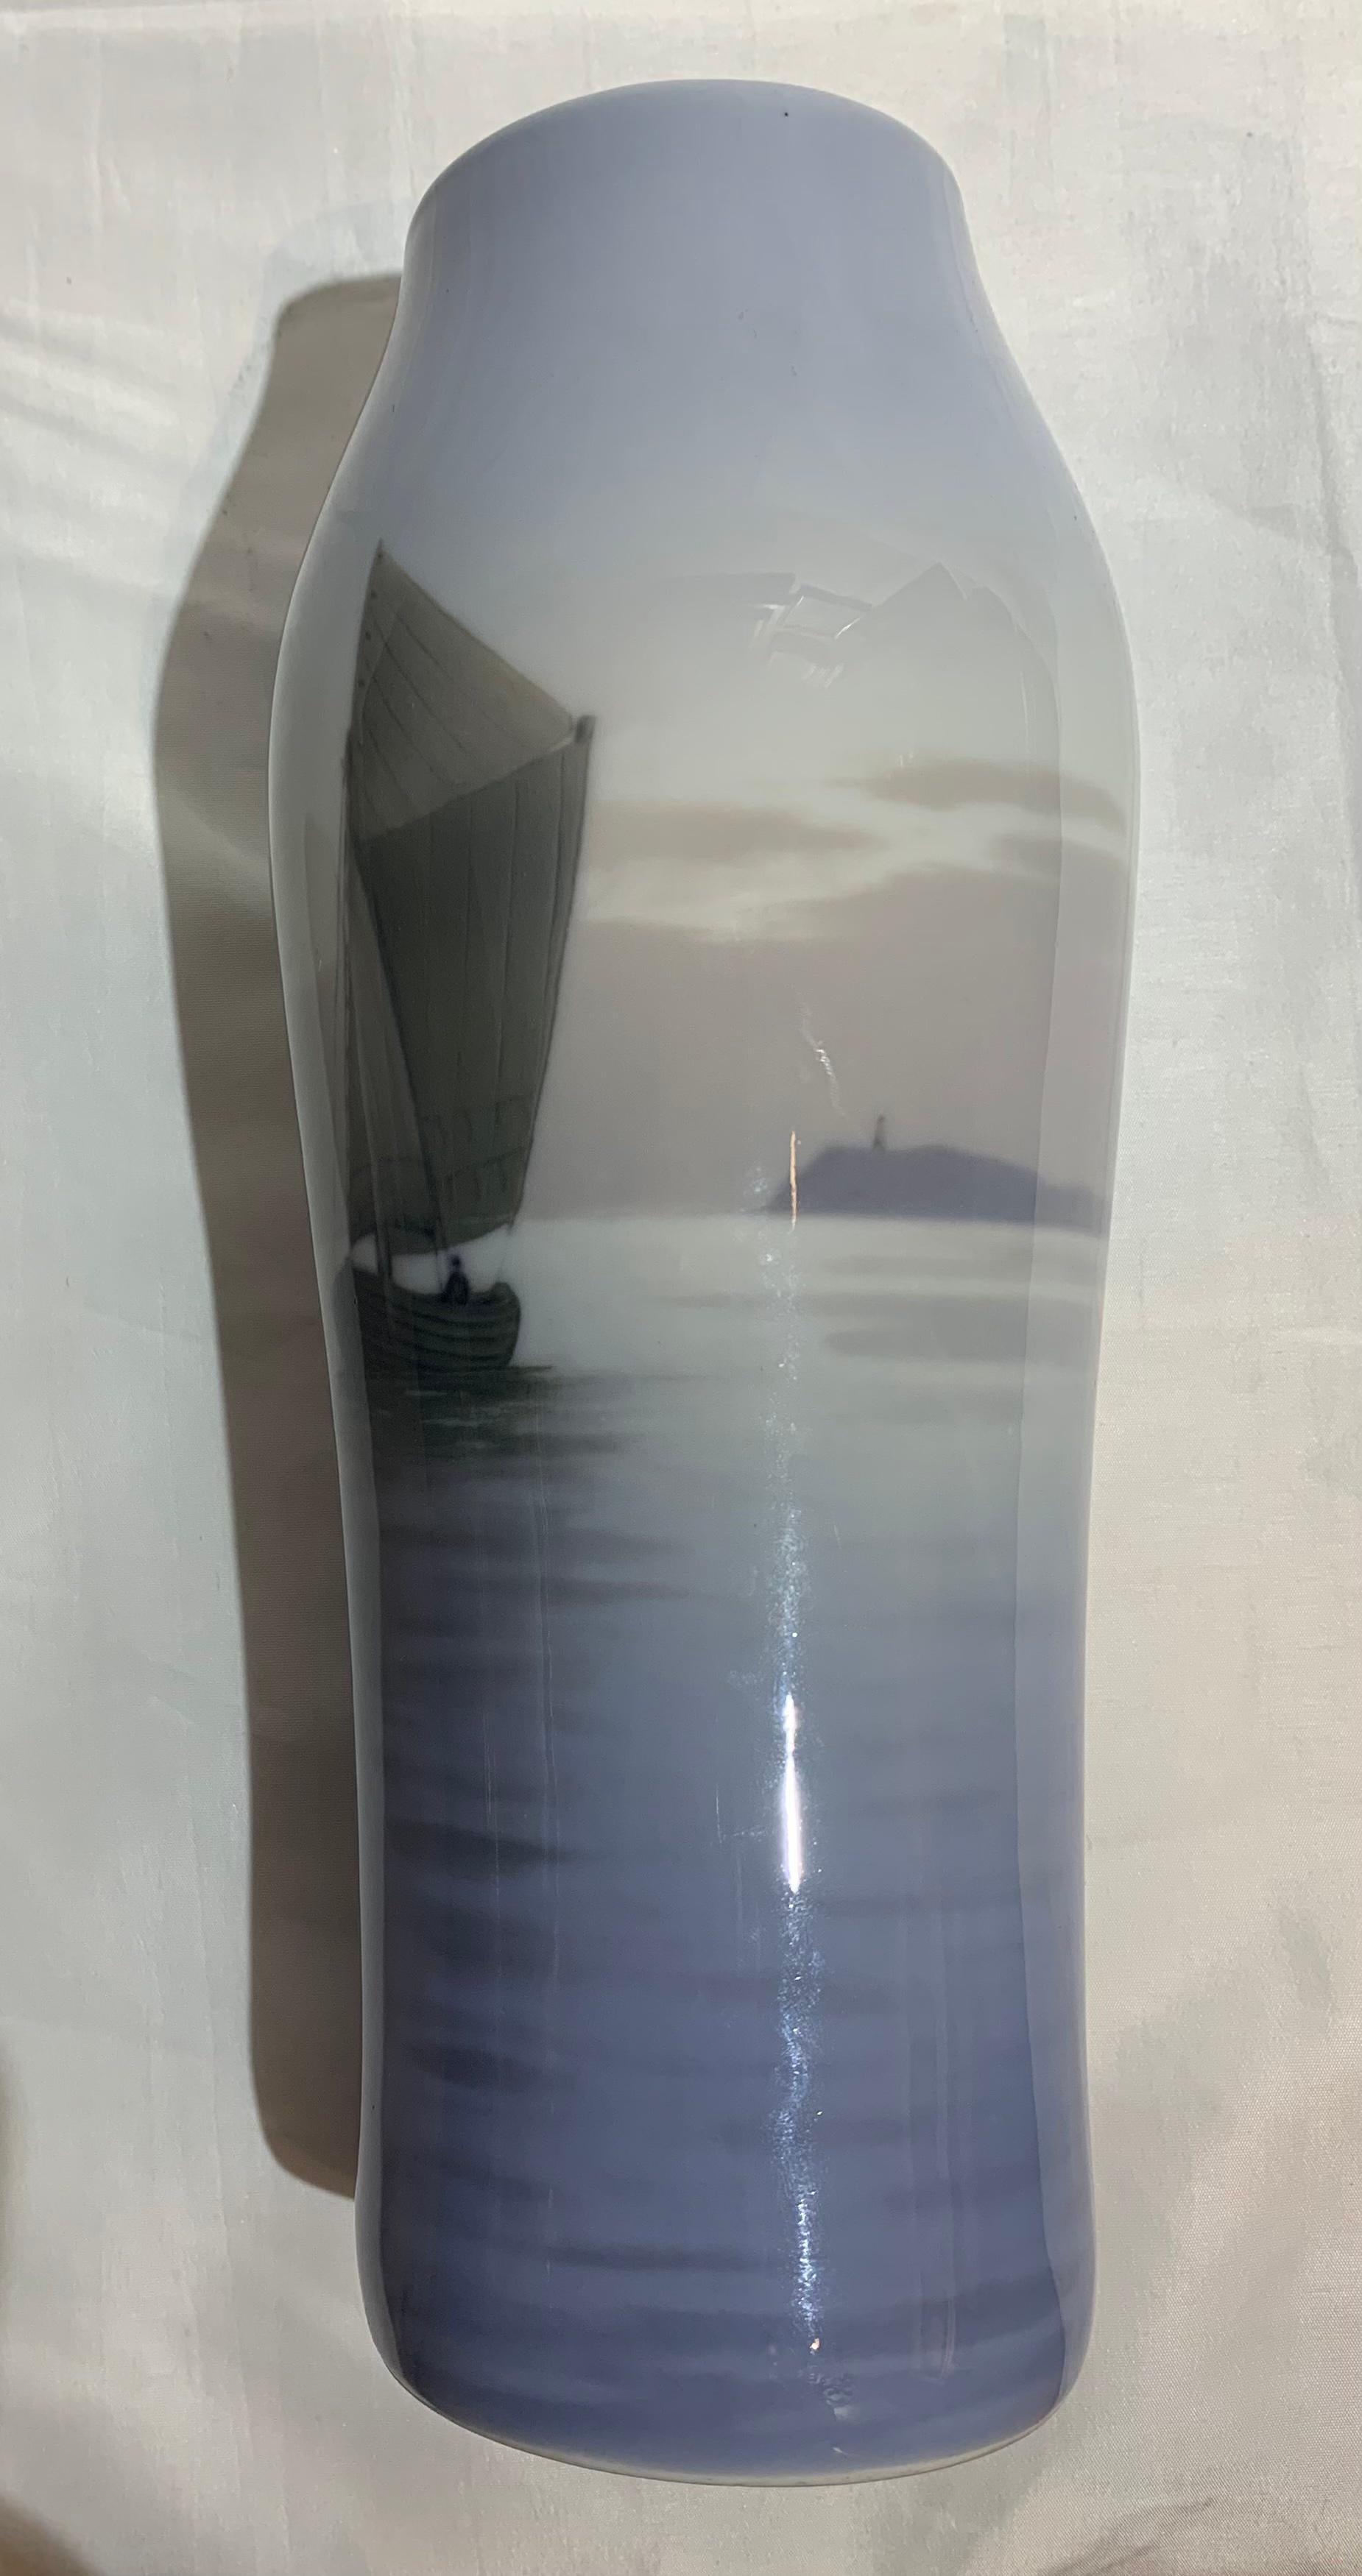 Royal Copehaghen. Vase with Sailing Ship in the Sea. Danish porcelain. Early 20th century. - Art Nouveau Sculpture by Unknown